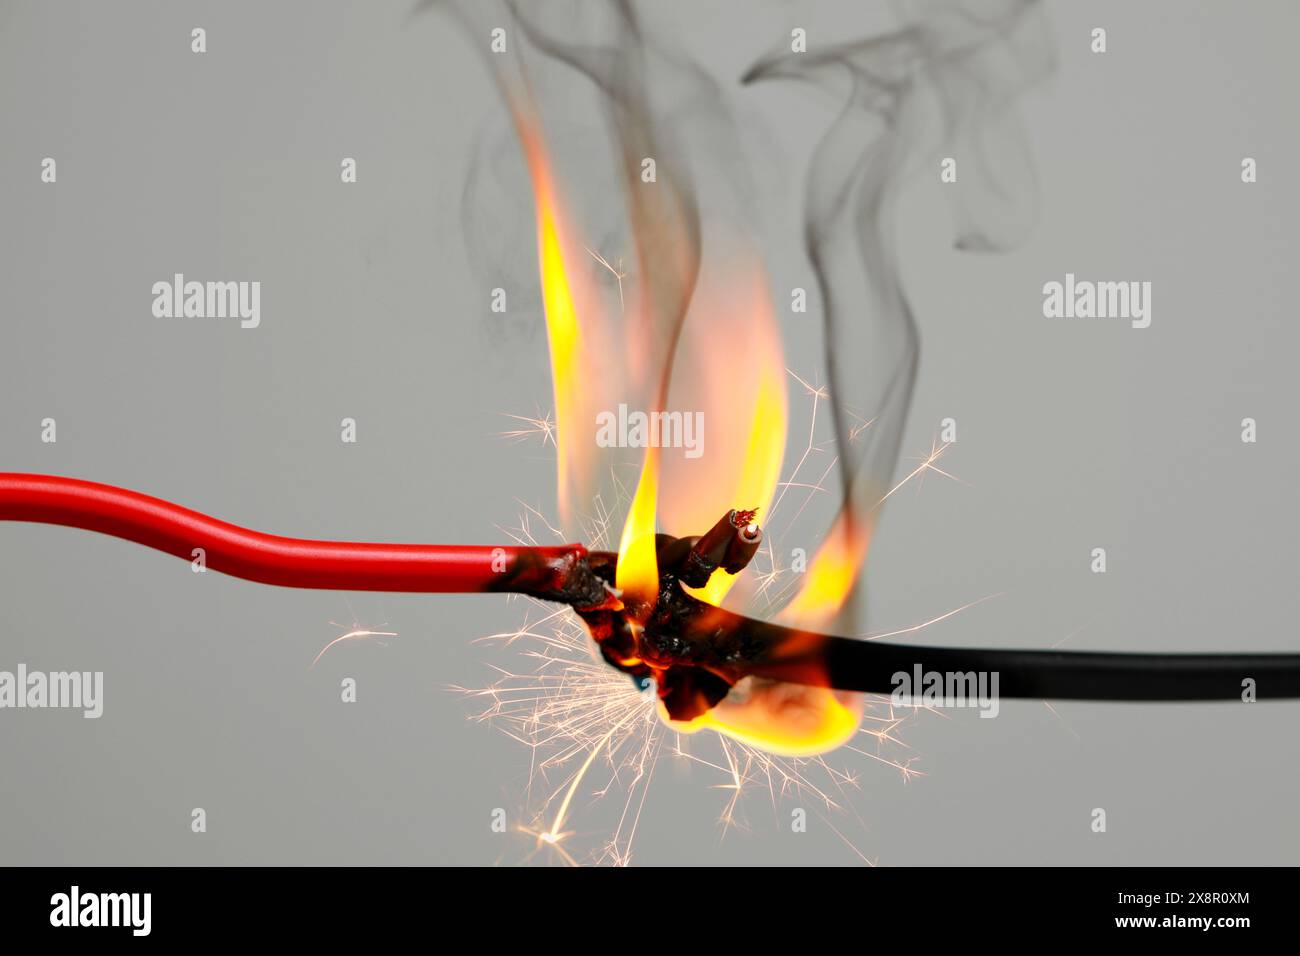 Electrical wire burning and sparking on light background, closeup Stock Photo